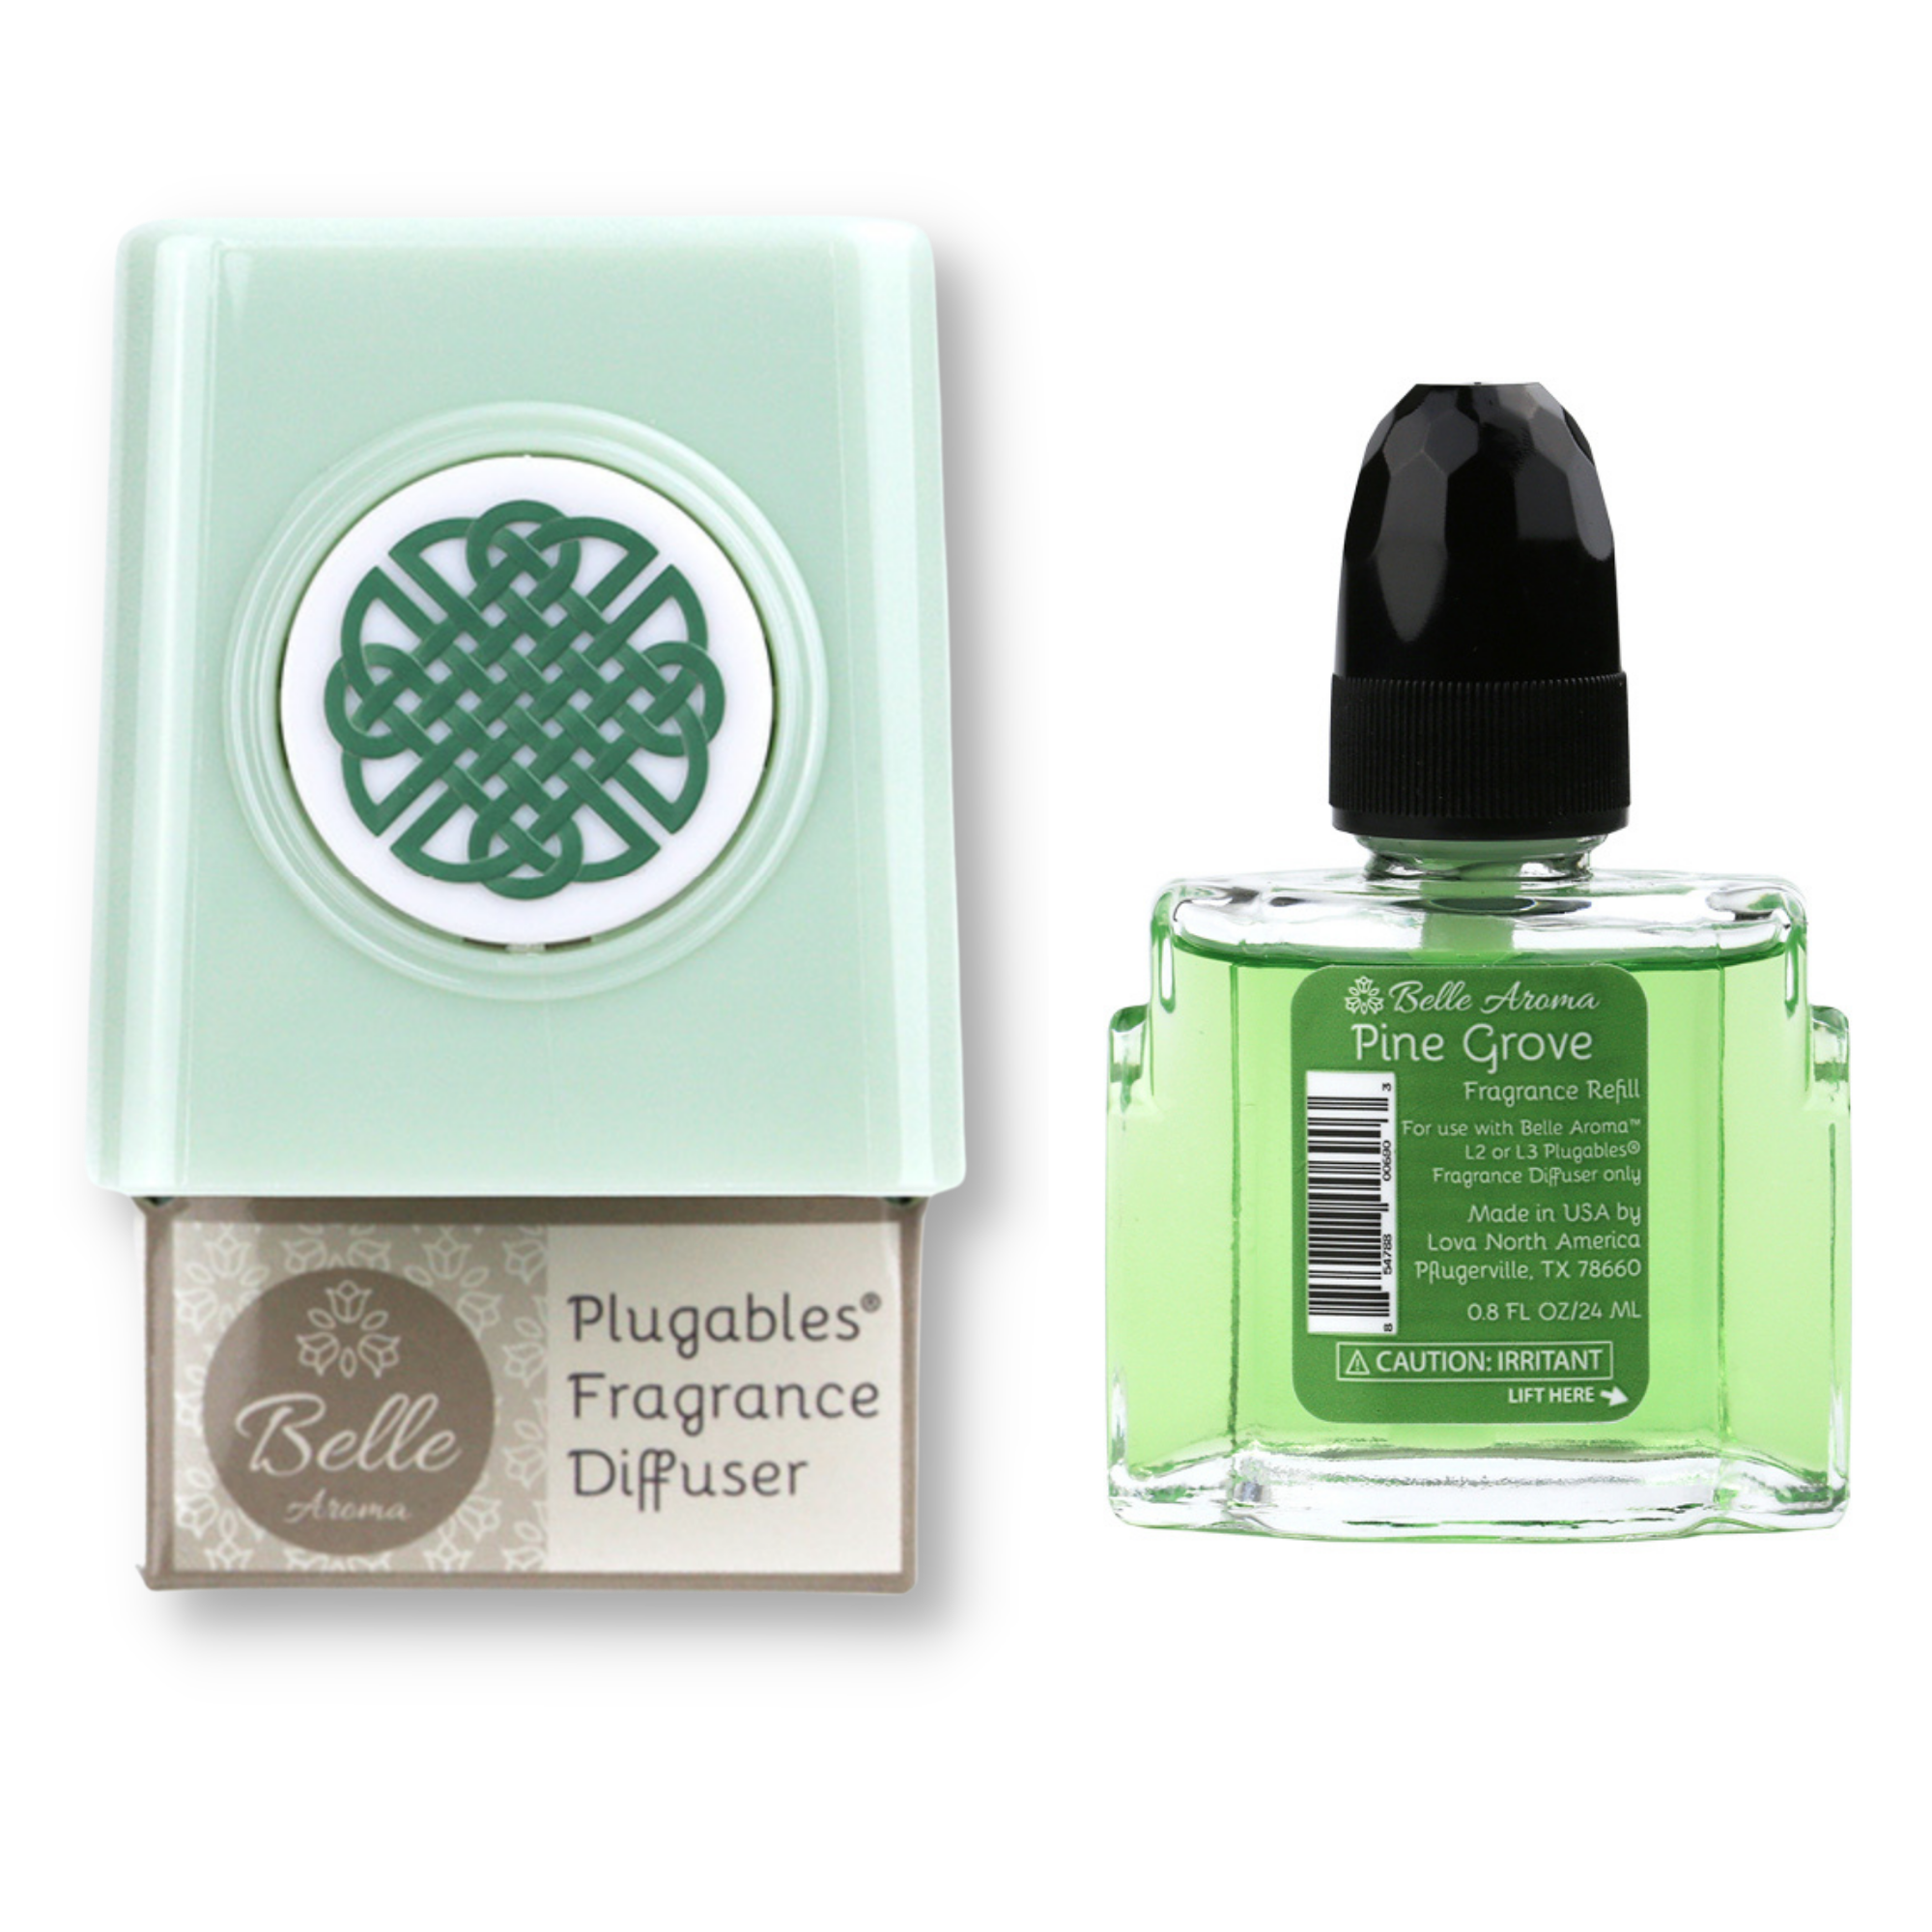 Celtic Knot Medallion Plugables® Plugin Aromalectric® Scented Oil Diffuser - Sea Glass with Pine Grove Fragrance Oil Home Fragrance Accessories